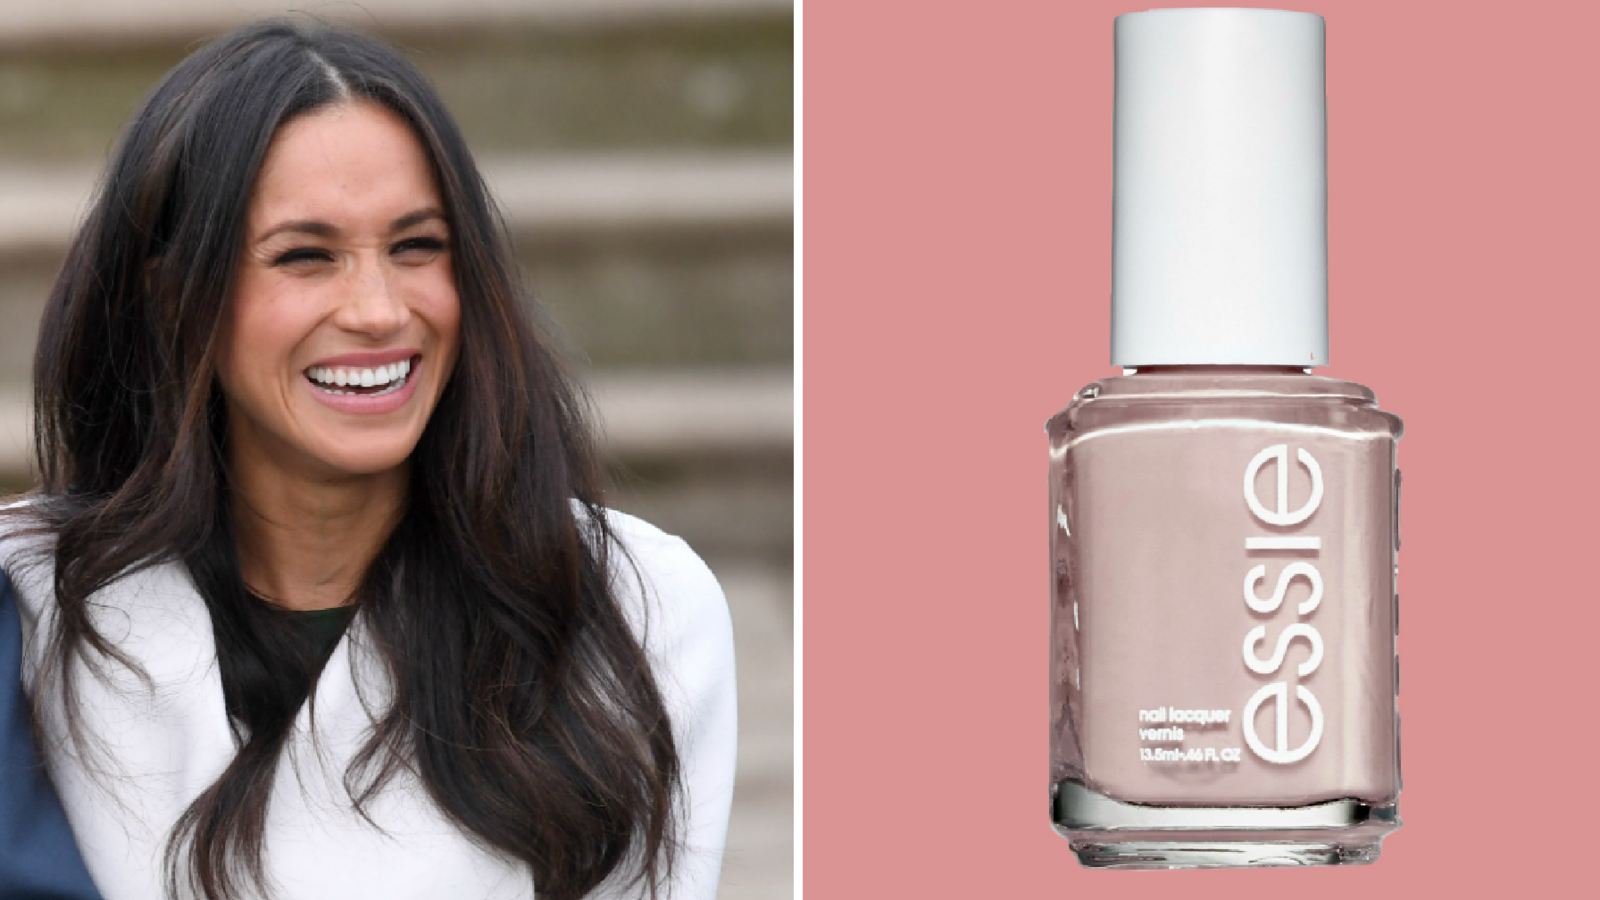 We Re 99 Positive Meghan Markle Will Wear One Of These Essie Nail Polishes To Her Wedding Essie Nail Polish Wedding Nail Polish Essie Nail